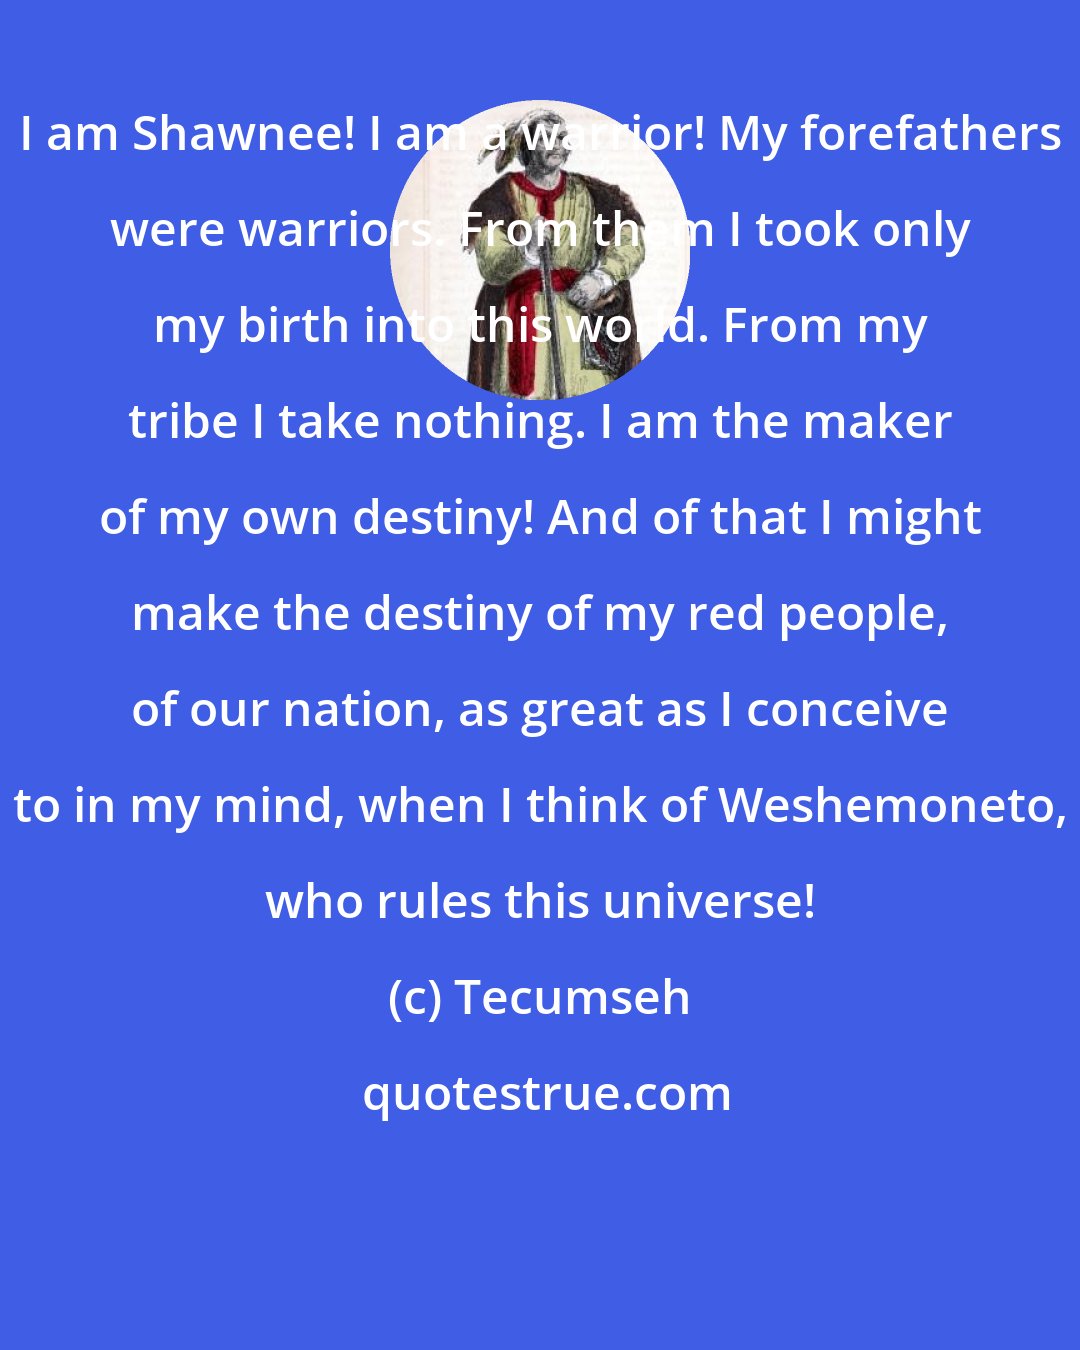 Tecumseh: I am Shawnee! I am a warrior! My forefathers were warriors. From them I took only my birth into this world. From my tribe I take nothing. I am the maker of my own destiny! And of that I might make the destiny of my red people, of our nation, as great as I conceive to in my mind, when I think of Weshemoneto, who rules this universe!